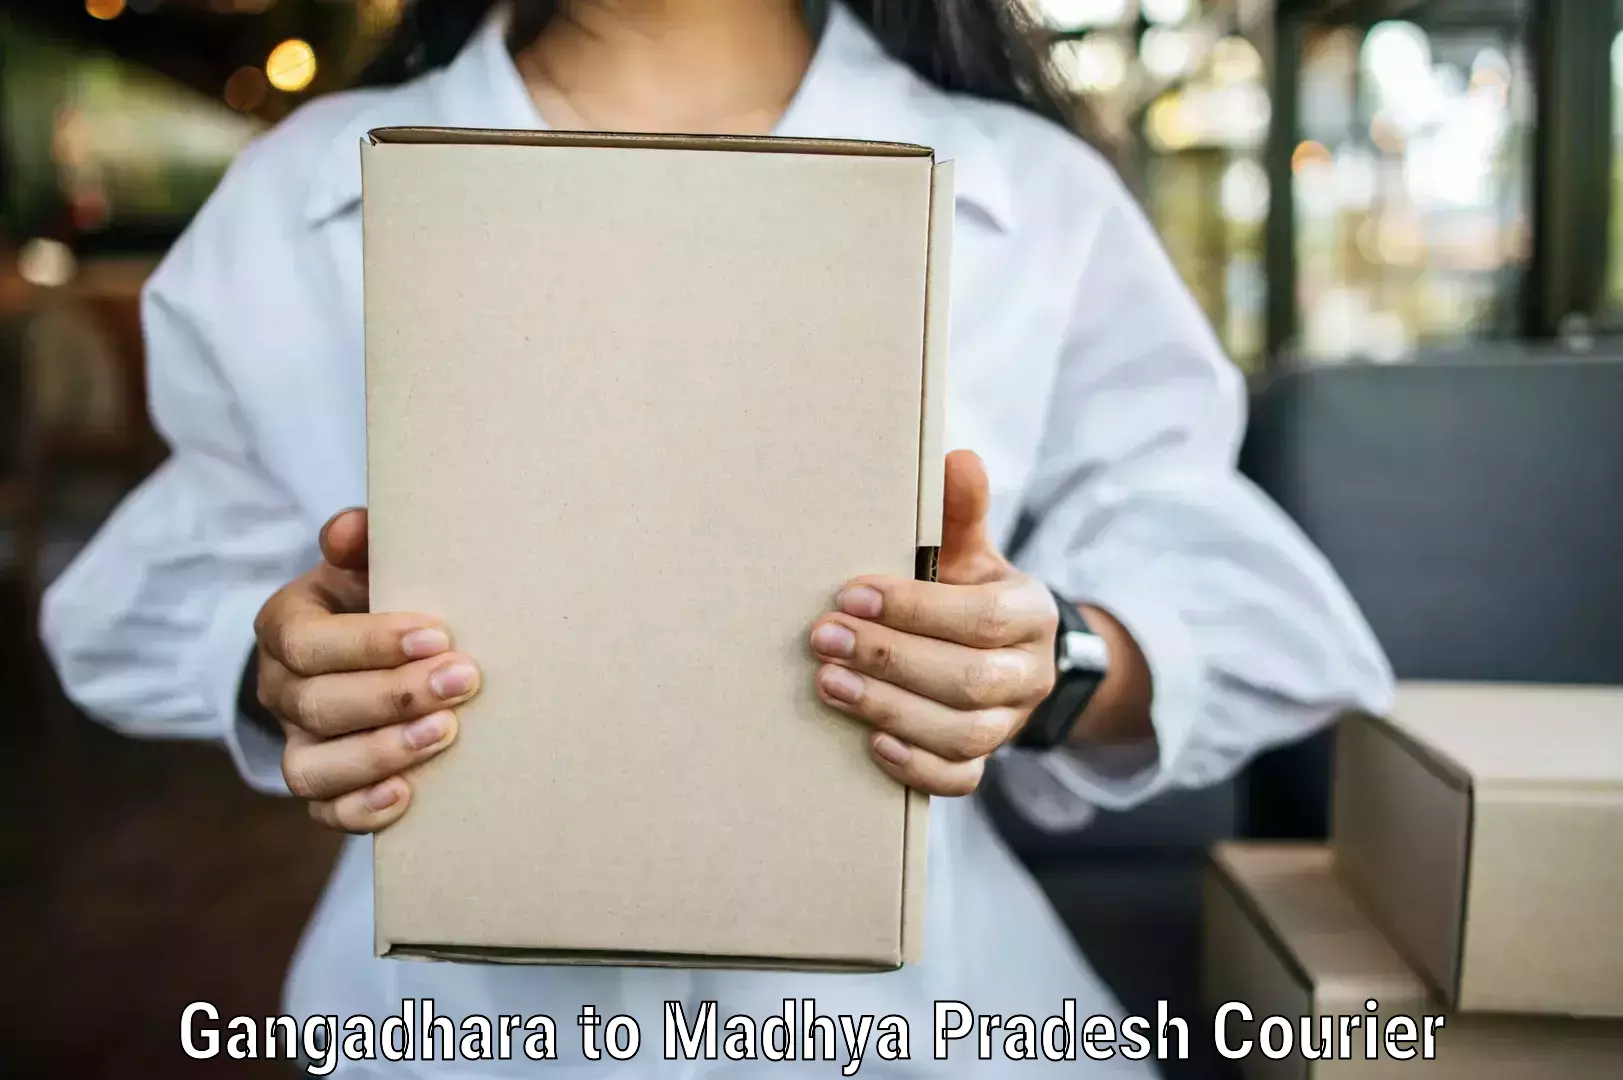 Courier service booking Gangadhara to Bhopal